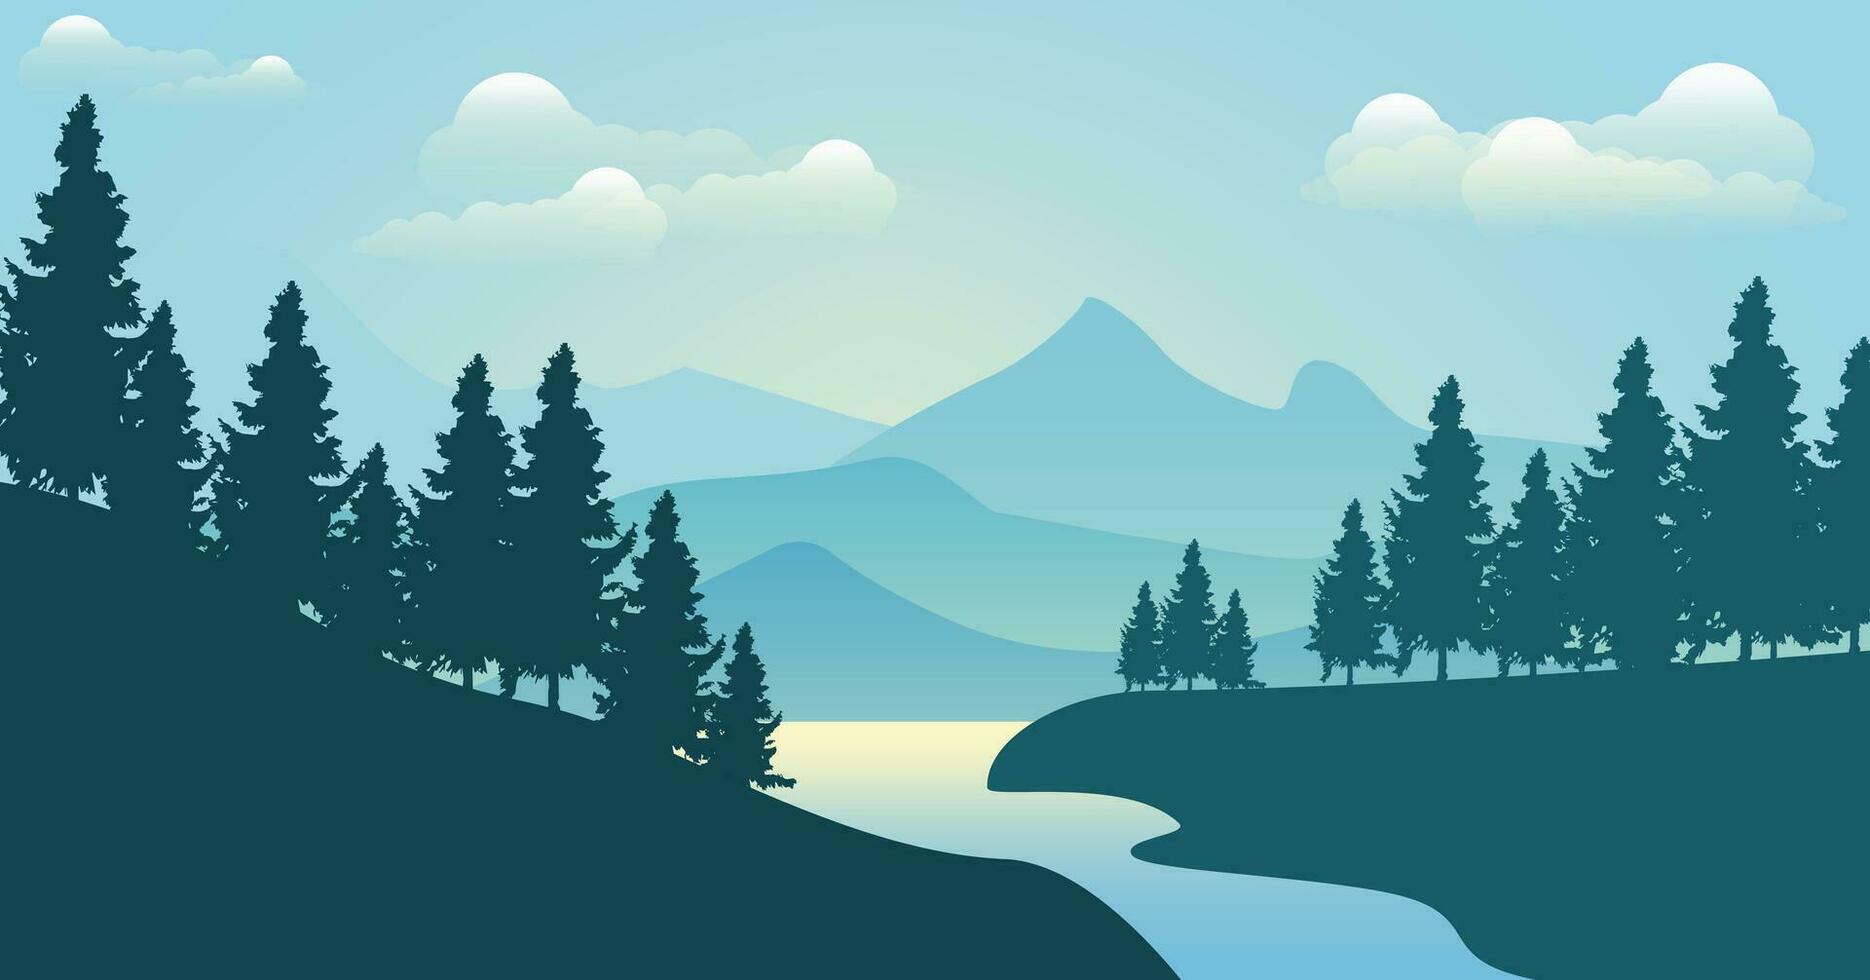 a river running through a forest with mountains in the background vector